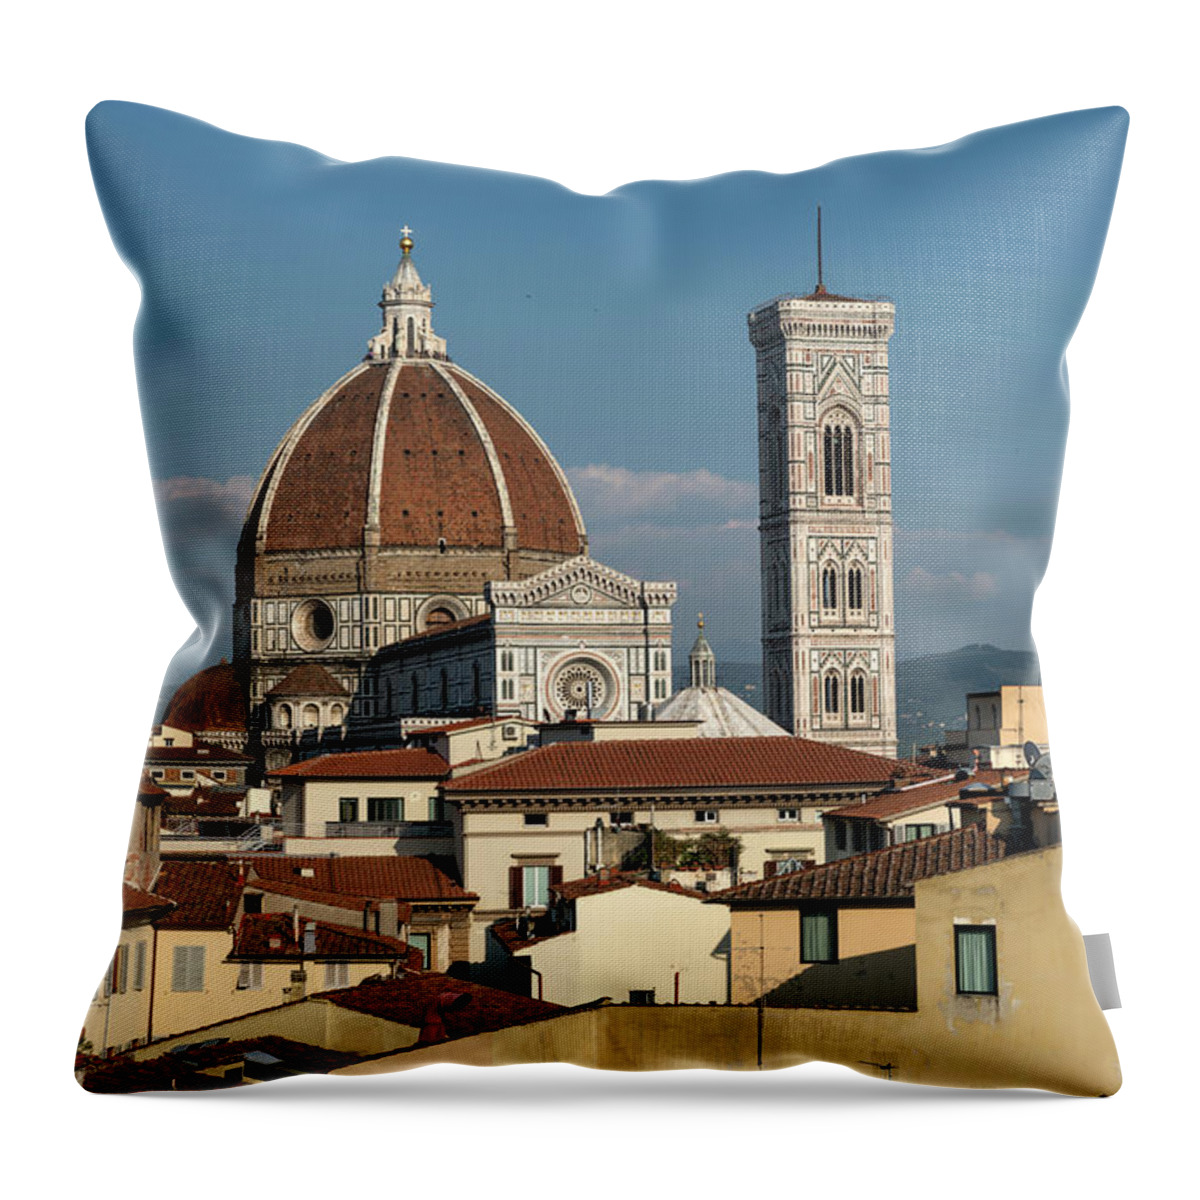 Campanile Throw Pillow featuring the photograph Florence Duomo And Campanile View Over by Izzet Keribar